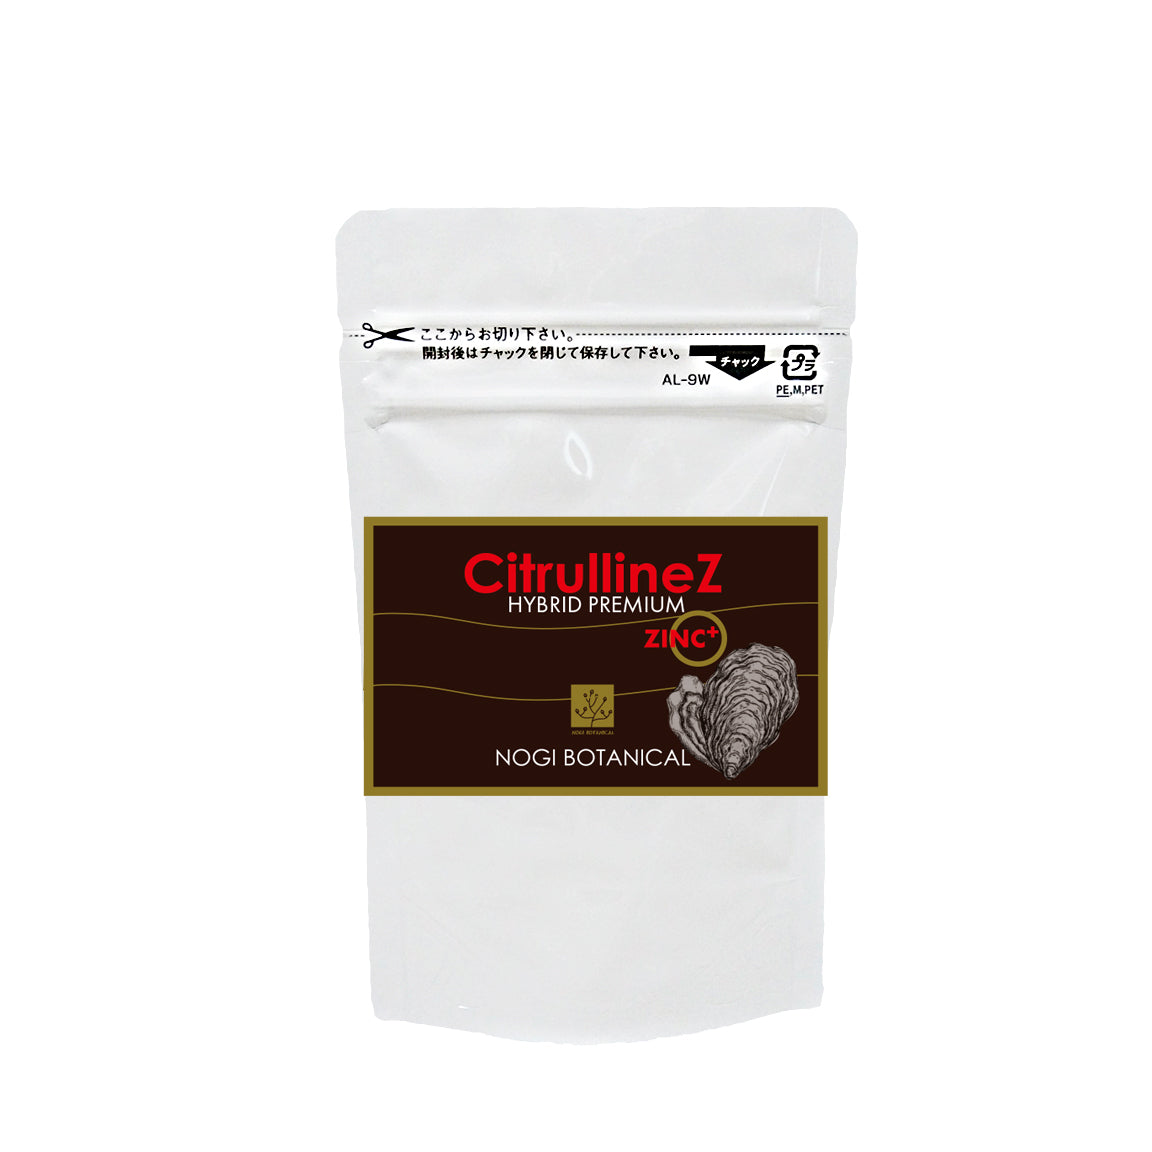 Citrulline Z-100% pure domestic L-citrulline and zinc yeast (S) 400.8mg x 60 tablets trial size 